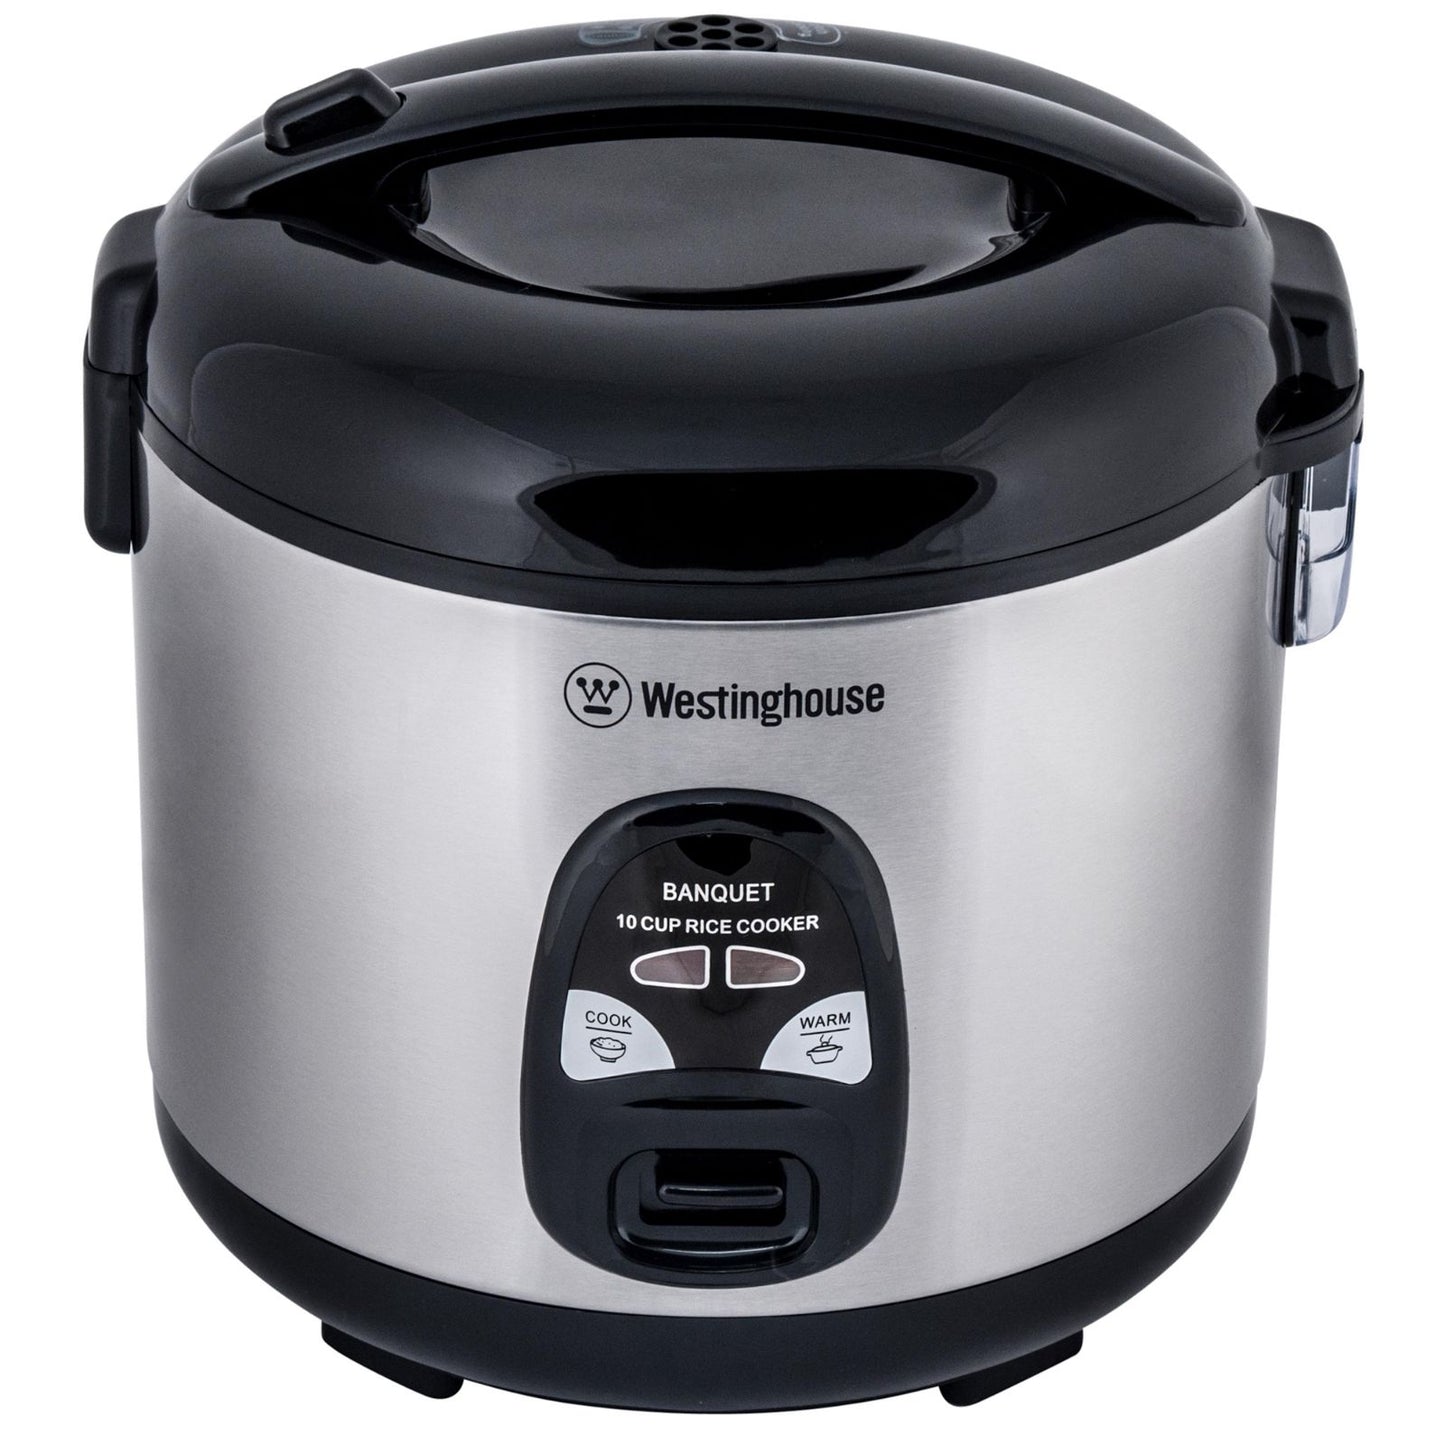 Westinghouse 10 Cup Rice Cooker Keep Warm Function-#product_category#- Distributed by:  under license